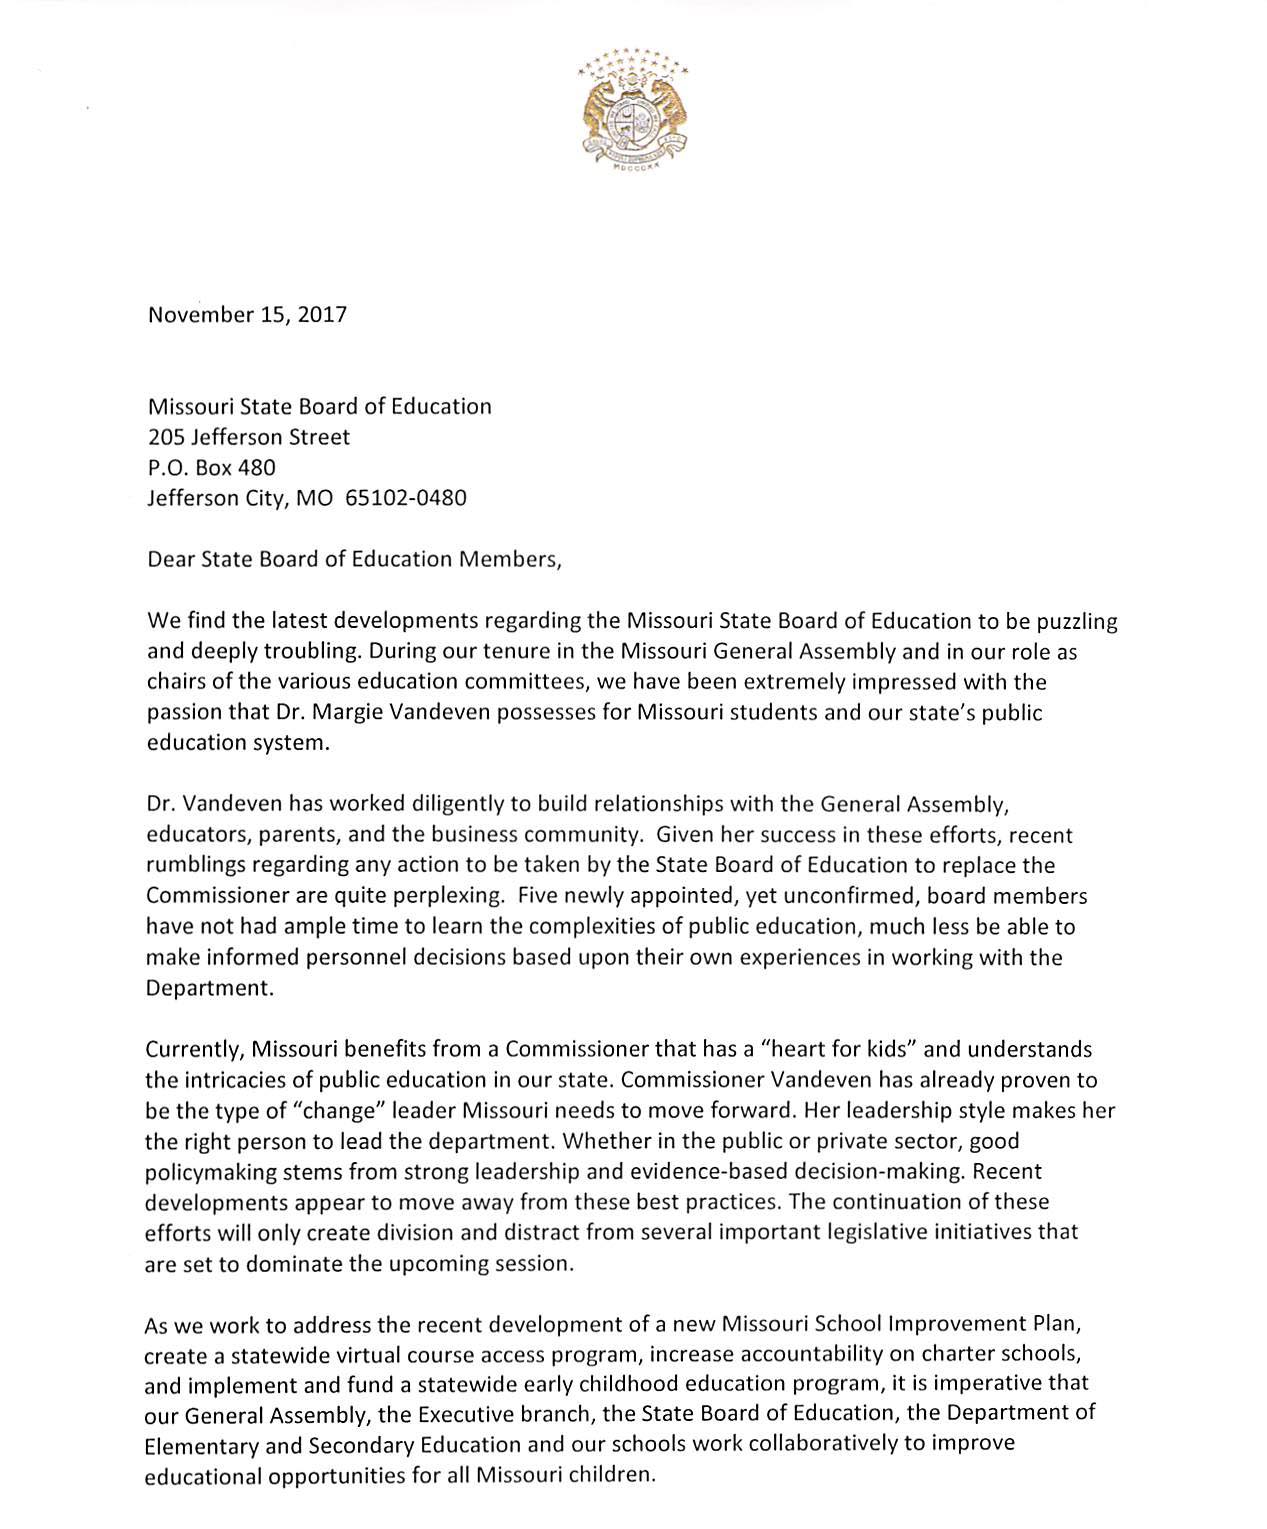 Letter to State Board of Education Members I_Page_1